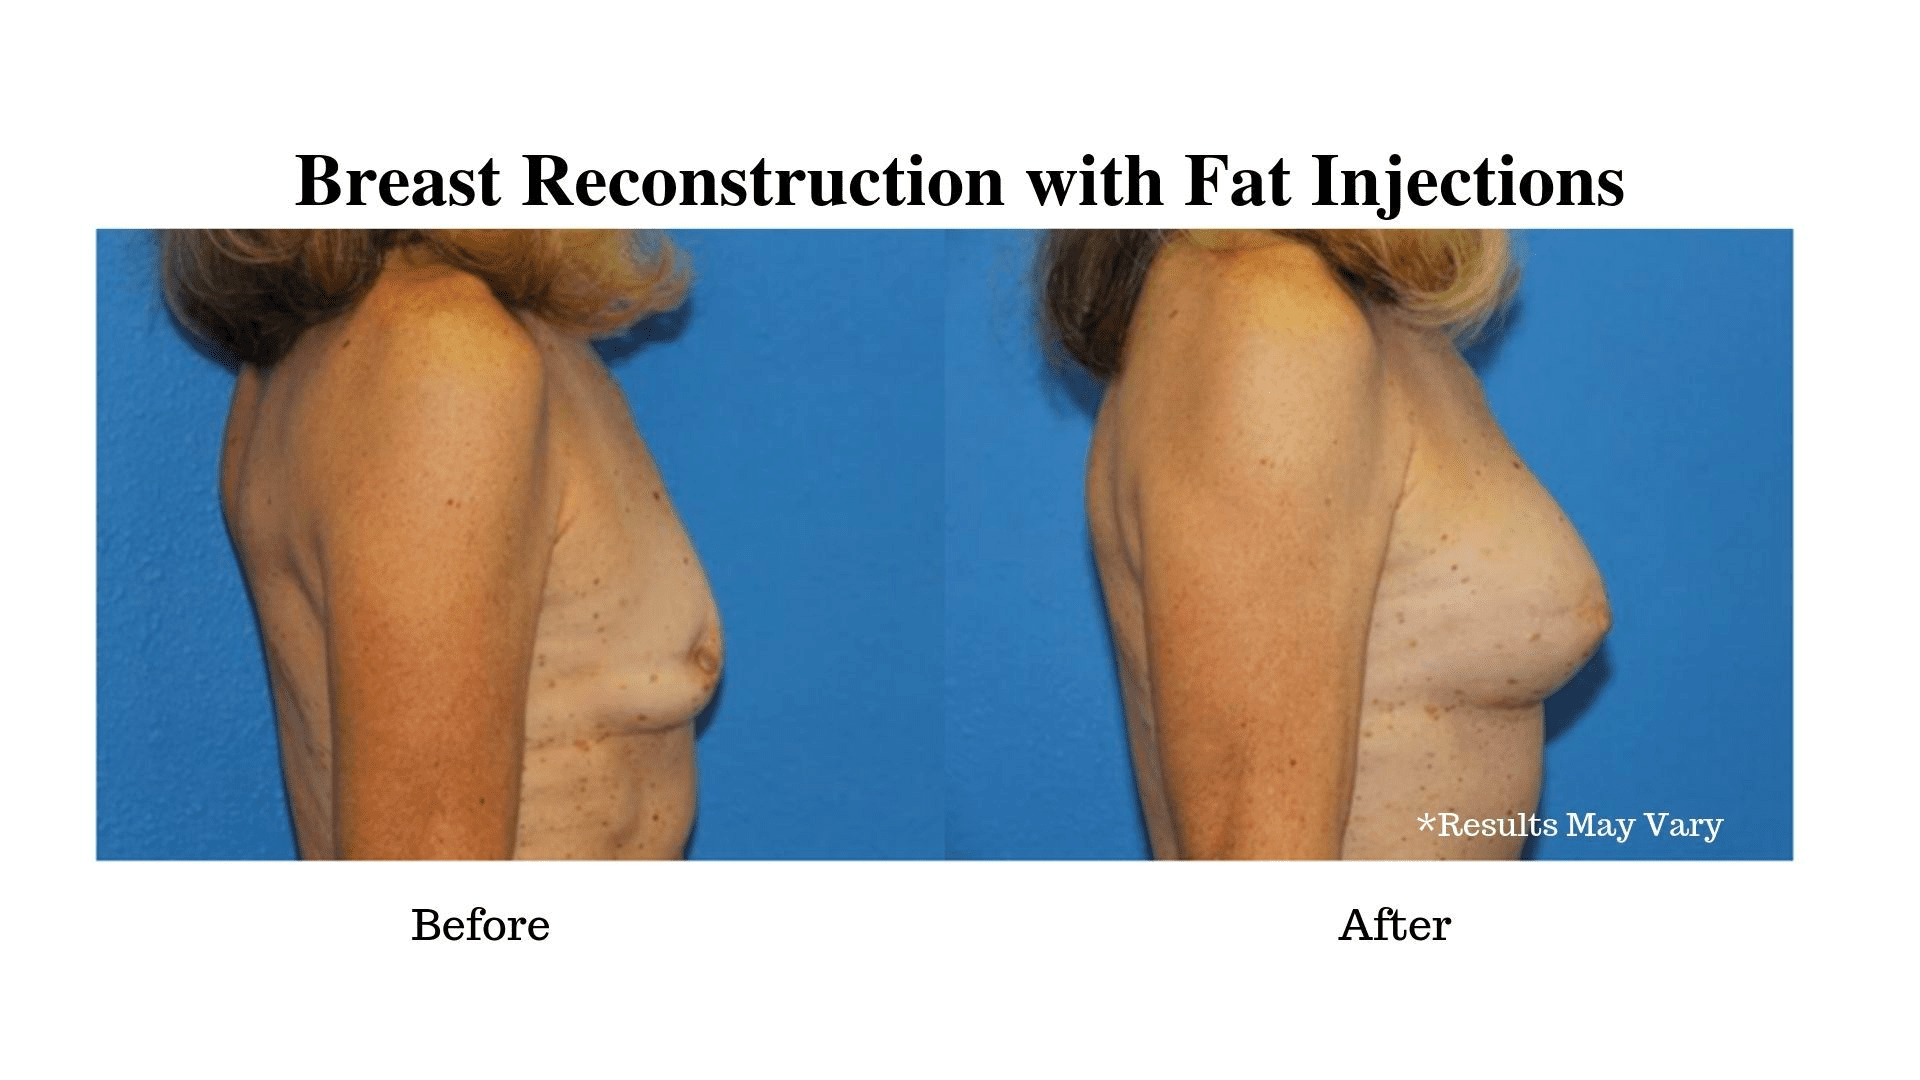 What Are the Benefits of Using Fat Injections for Breast Reconstruction?